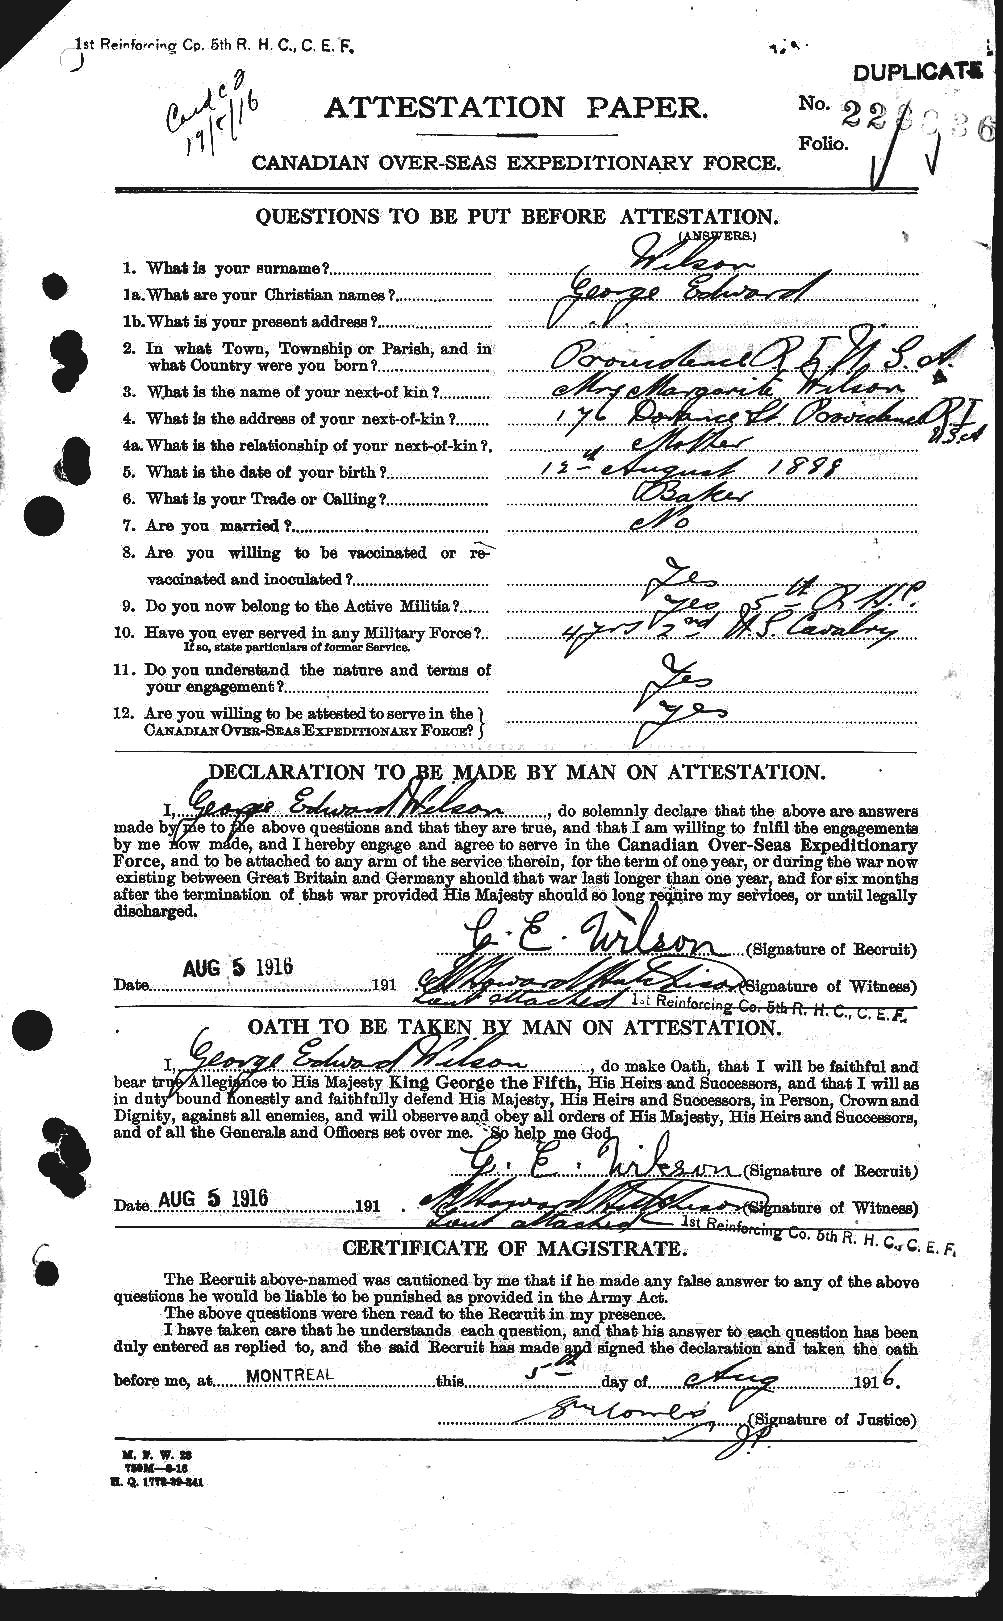 Personnel Records of the First World War - CEF 679270a